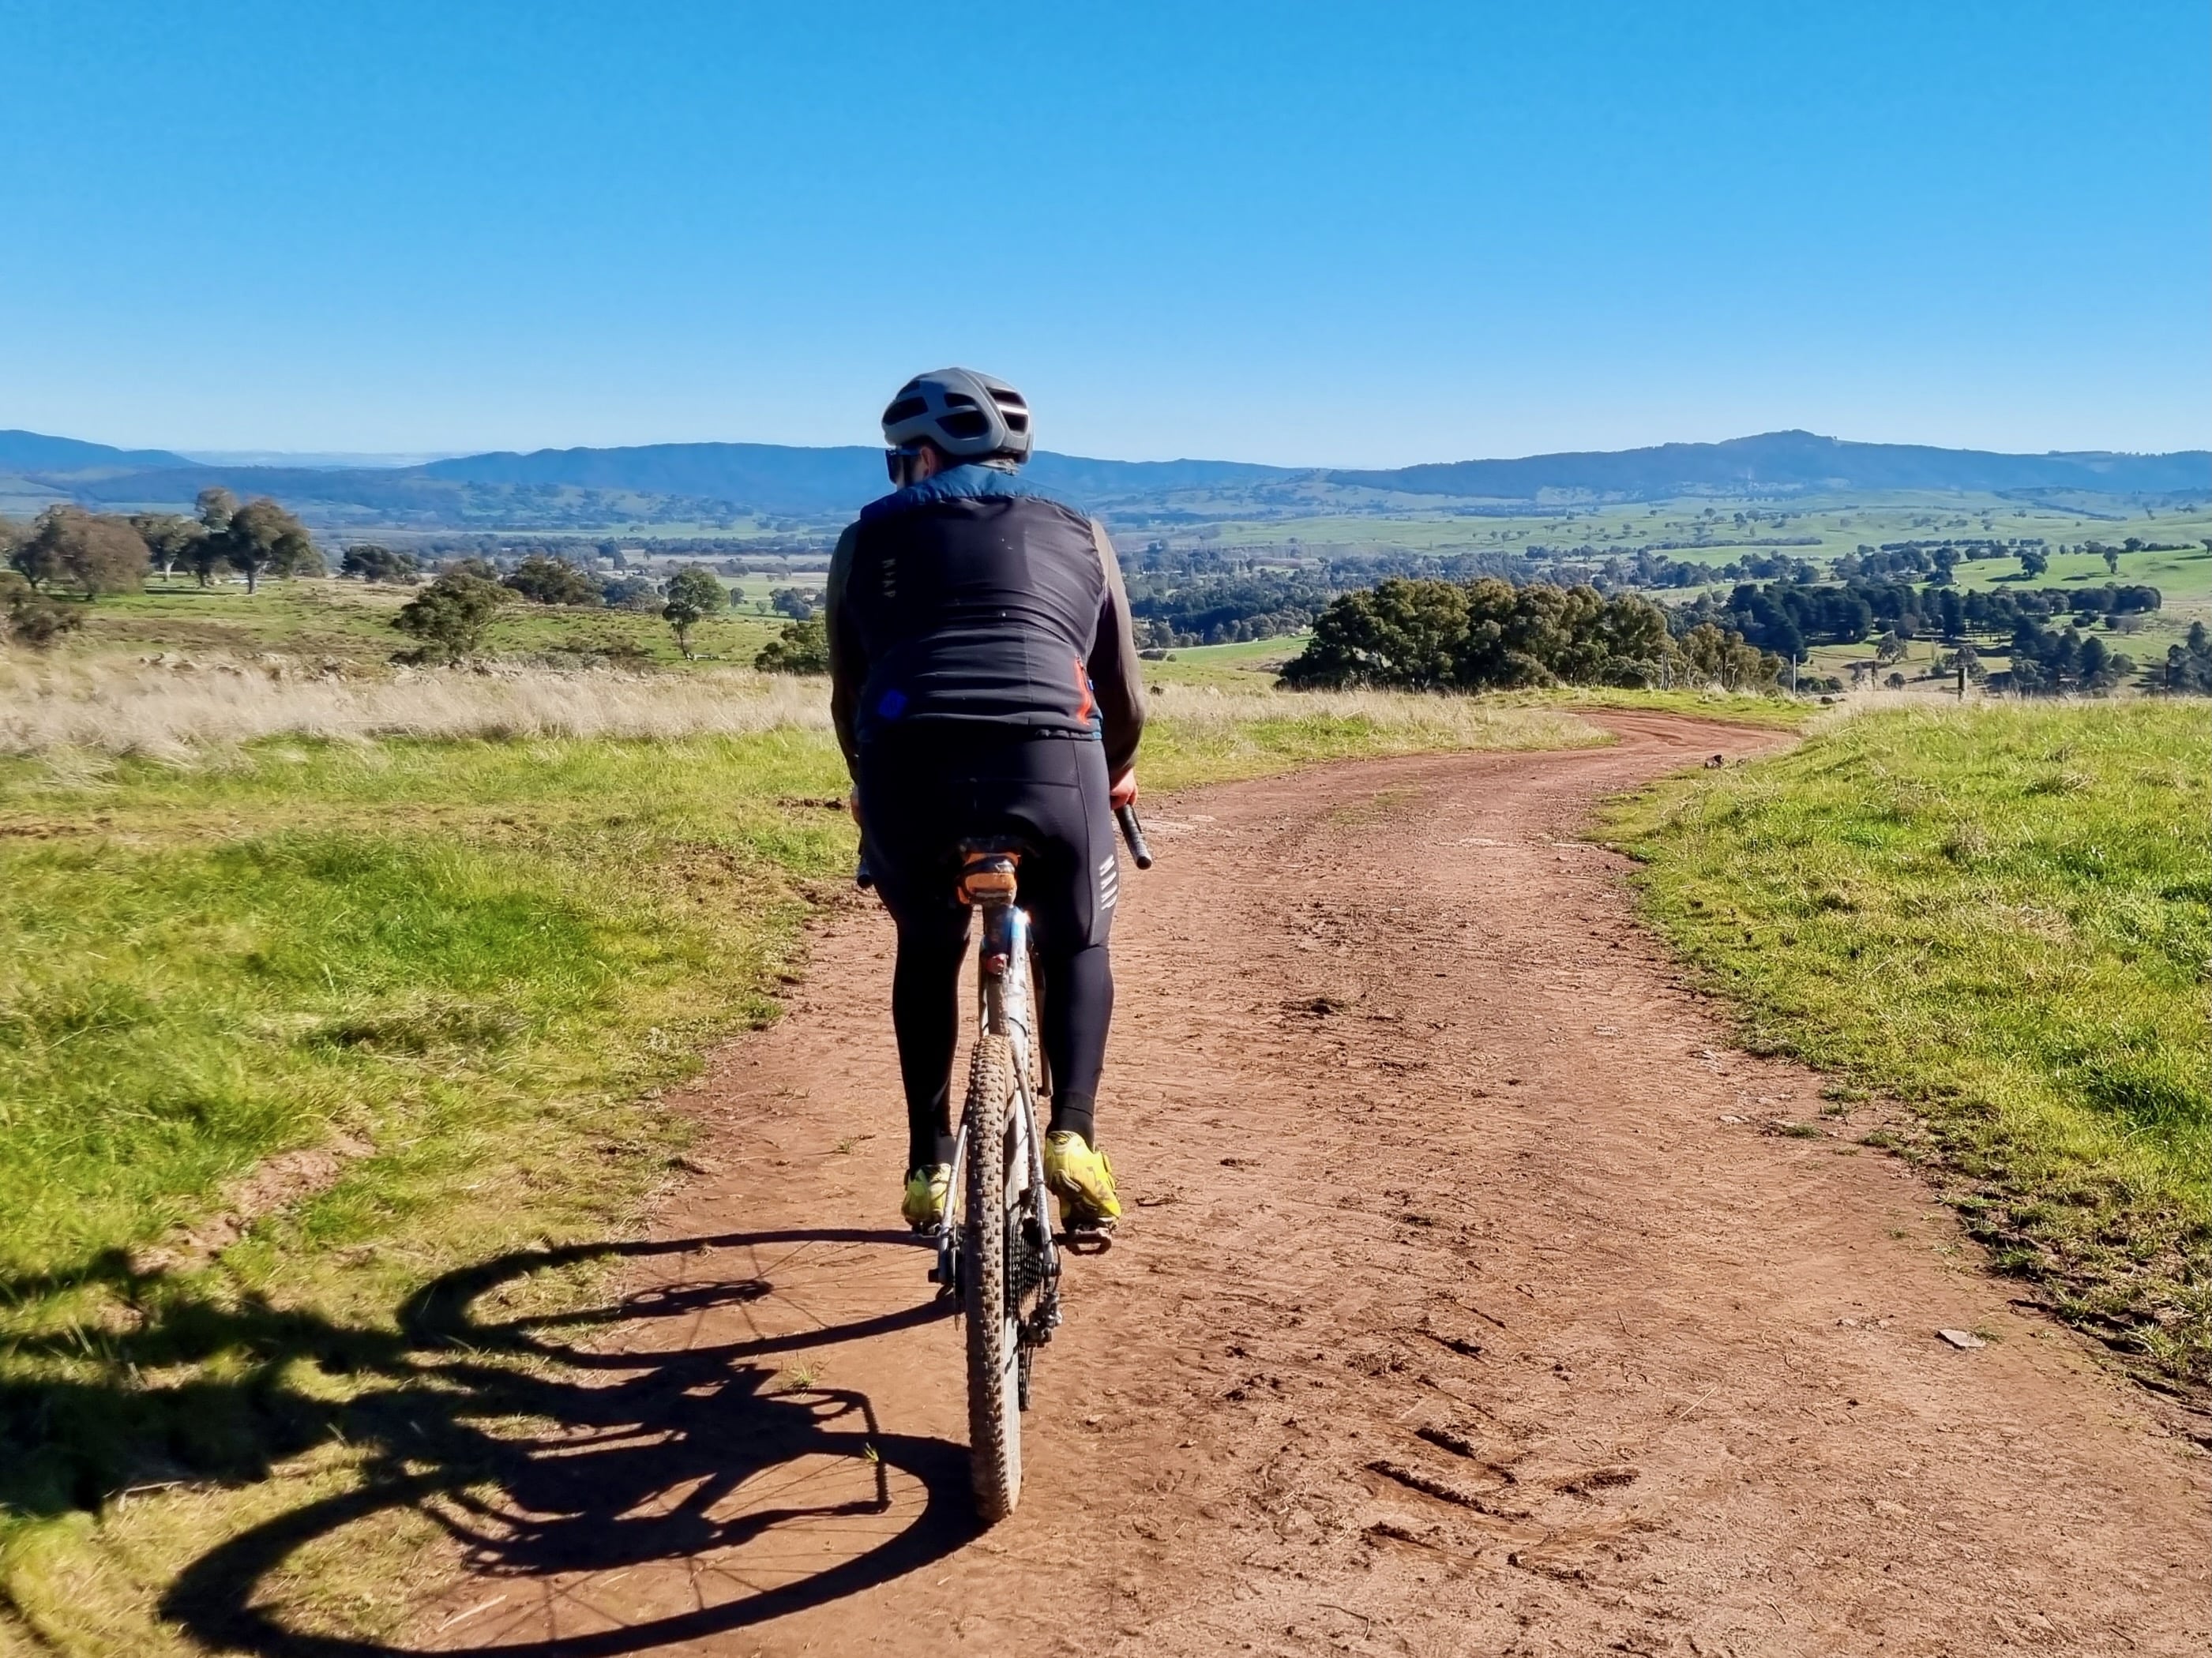 Cyclist riding on a smooth gravel road with rolling hills in the distance on a sunny day